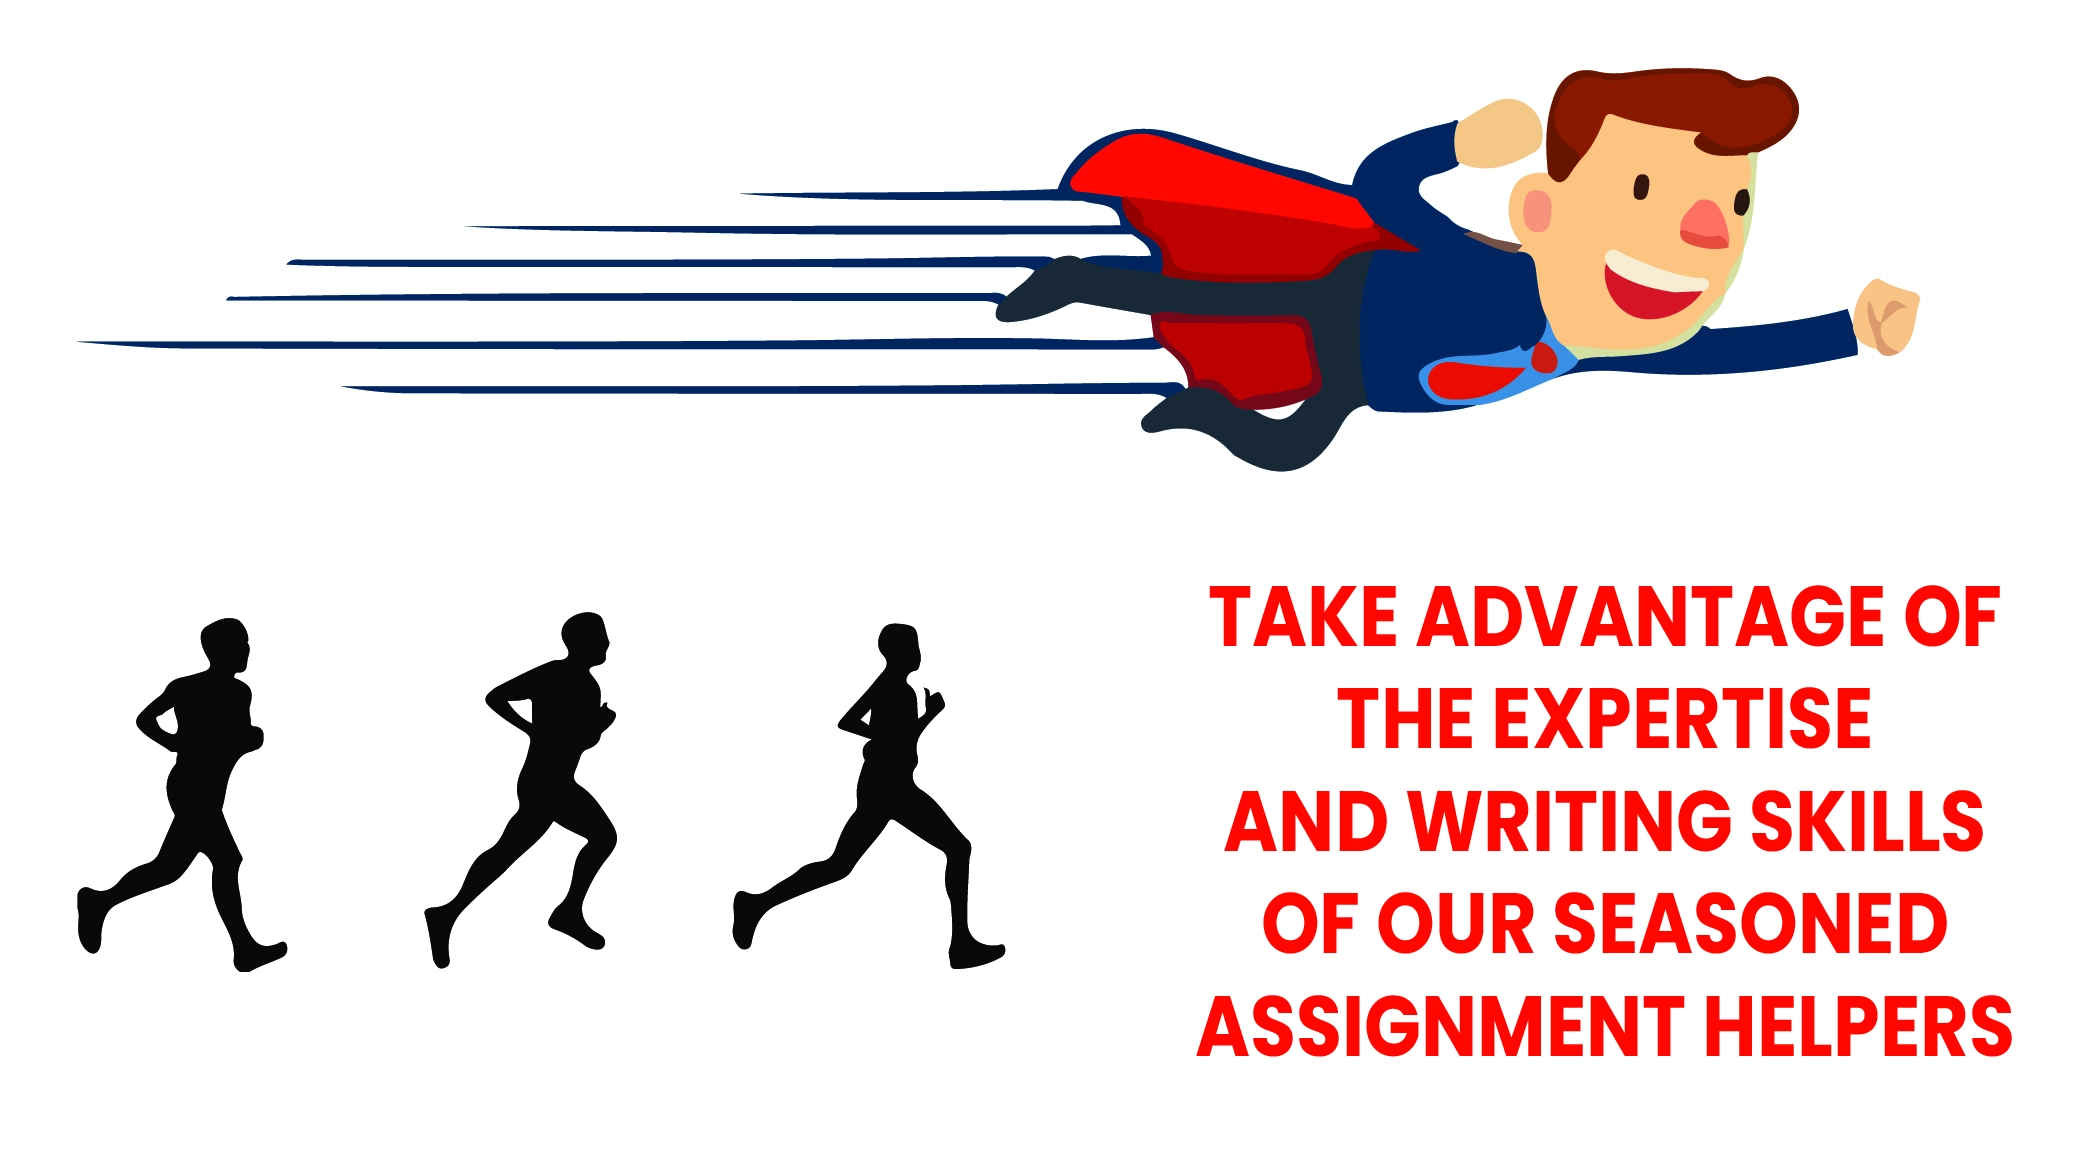 Take advantage of the expertise and writing skills of our seasoned assignment helpers